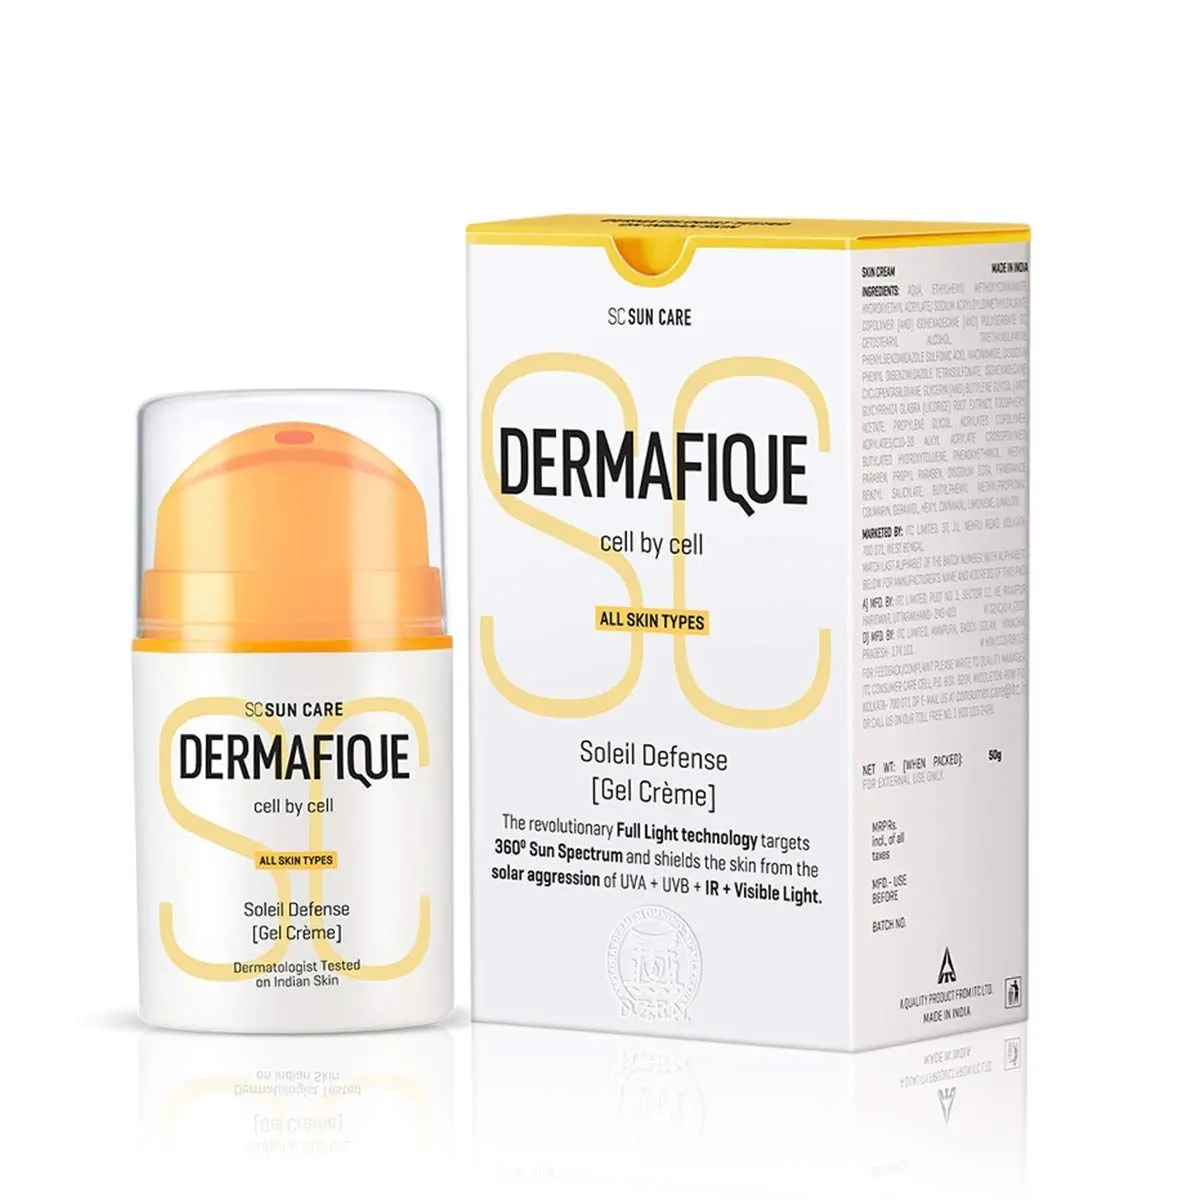 Dermafique Soleil Defense Gel Creme SPF 30 Sunscreen, for All Skin Types, Protects from tanning and pigmentation, Targets UVA, UVB, Infra-red and Visibile Light, , Lightweight & Non-sticky, Dermatologist Tested, paraben free (50 g)